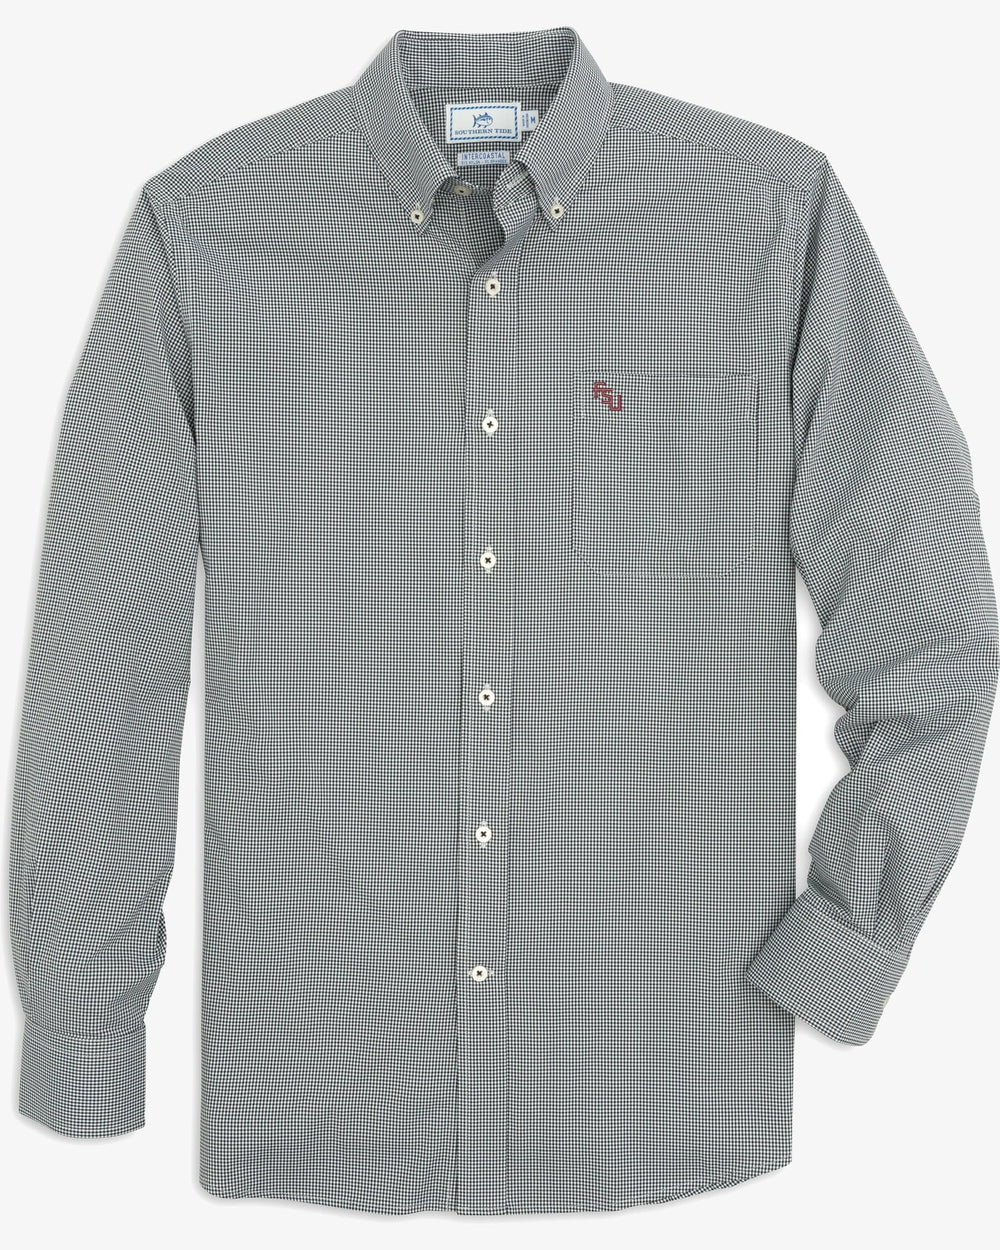 The front view of the FSU Seminoles Gingham Button Down Shirt By Southern Tide - Black